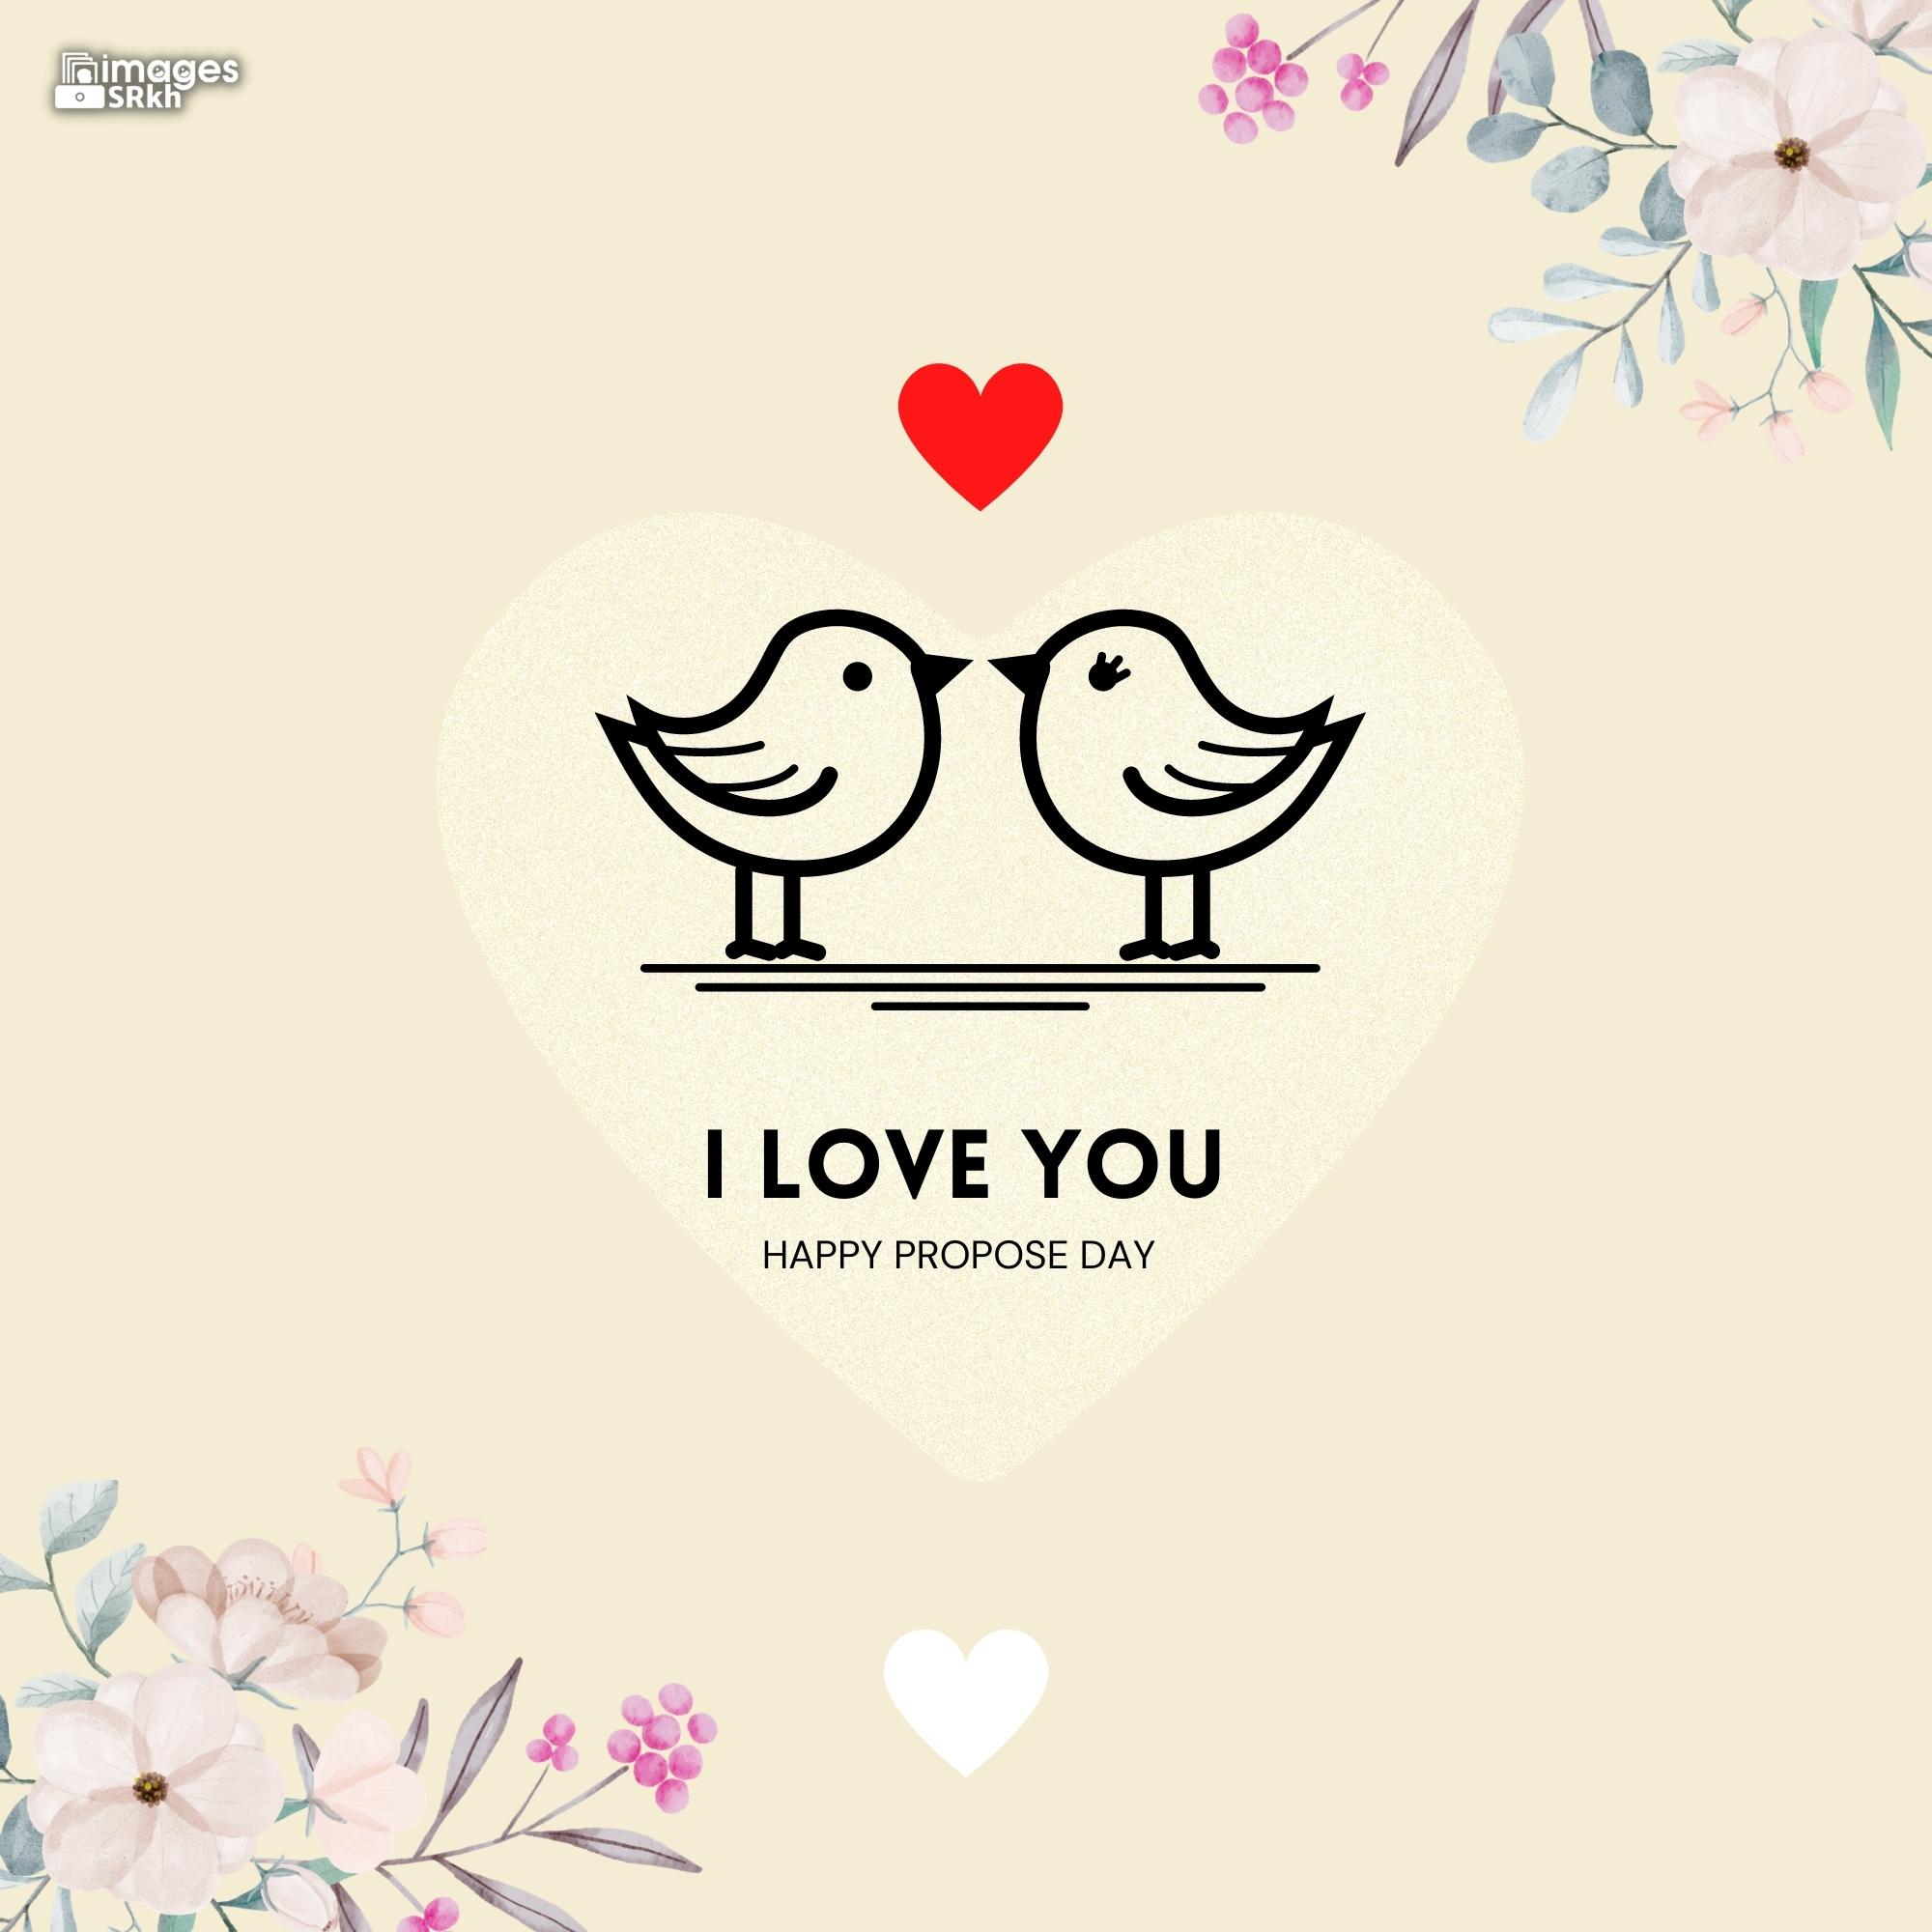 Happy Propose Day Images | 378 | I LOVE YOU